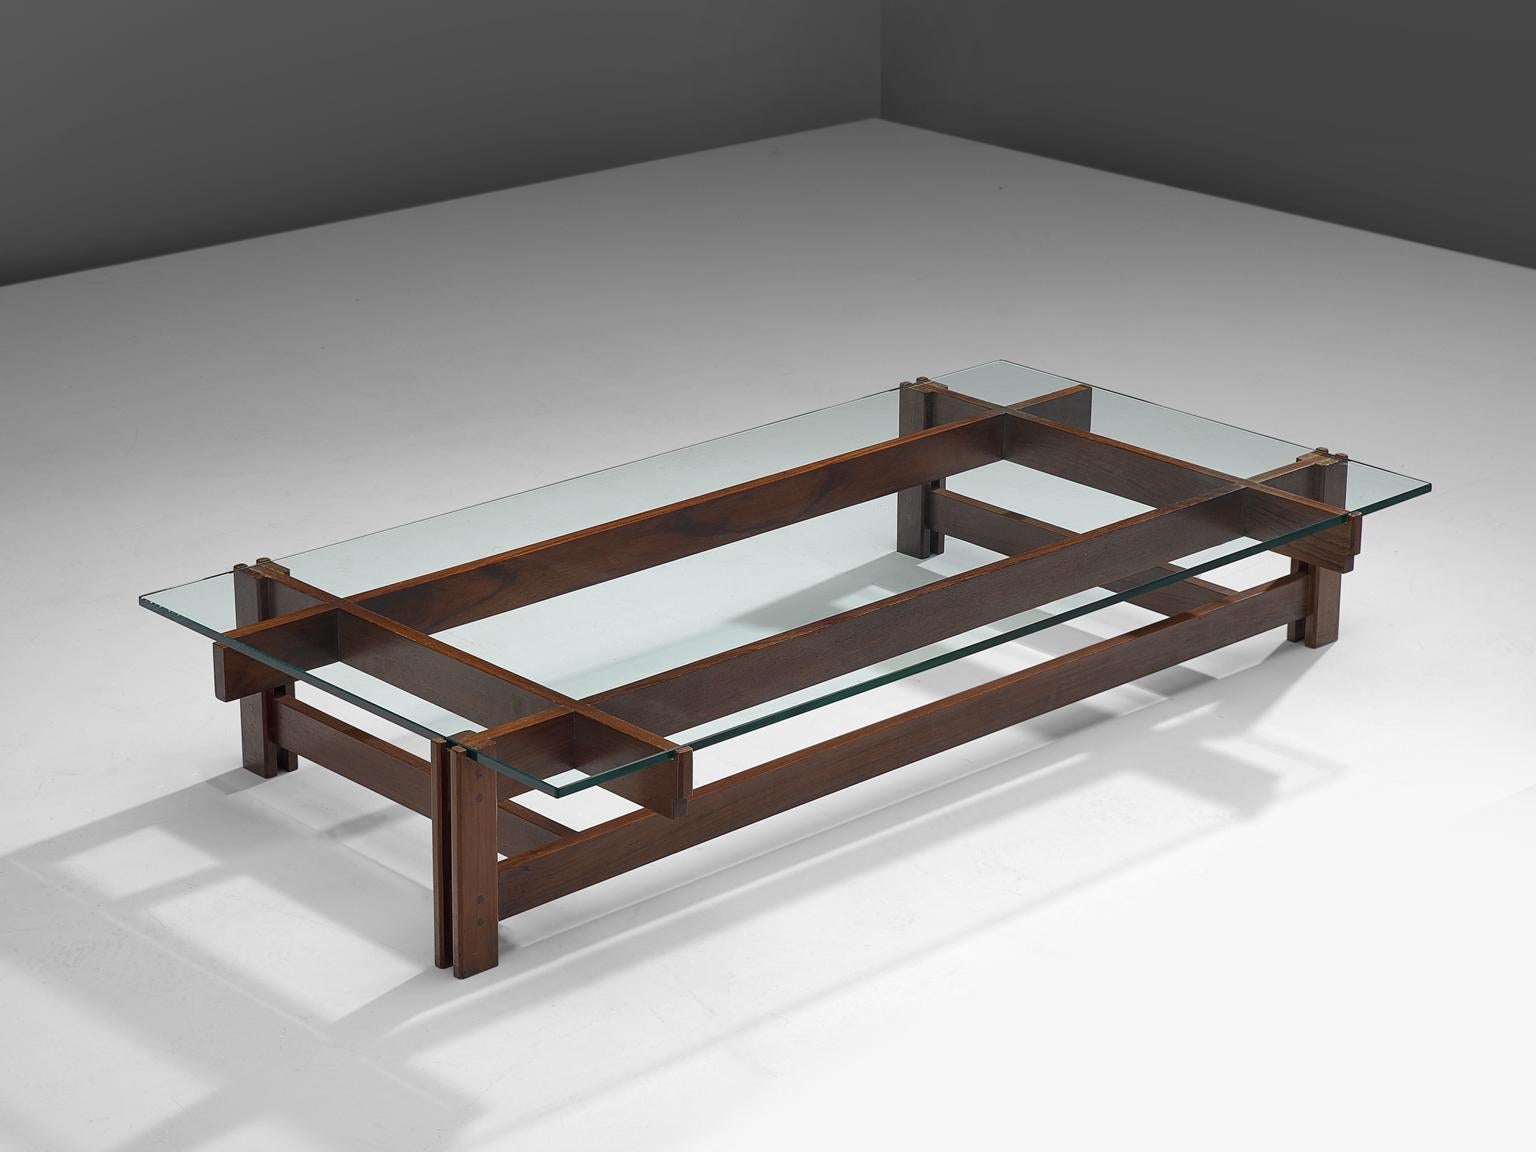 Ico Parisi for Cassina, cocktail table model 751, rosewood, glass, Italy, 1962

This coffee table is made from solid rosewood and executed with a glass top. The construction is created by means of assembling wooden parts with identical cross